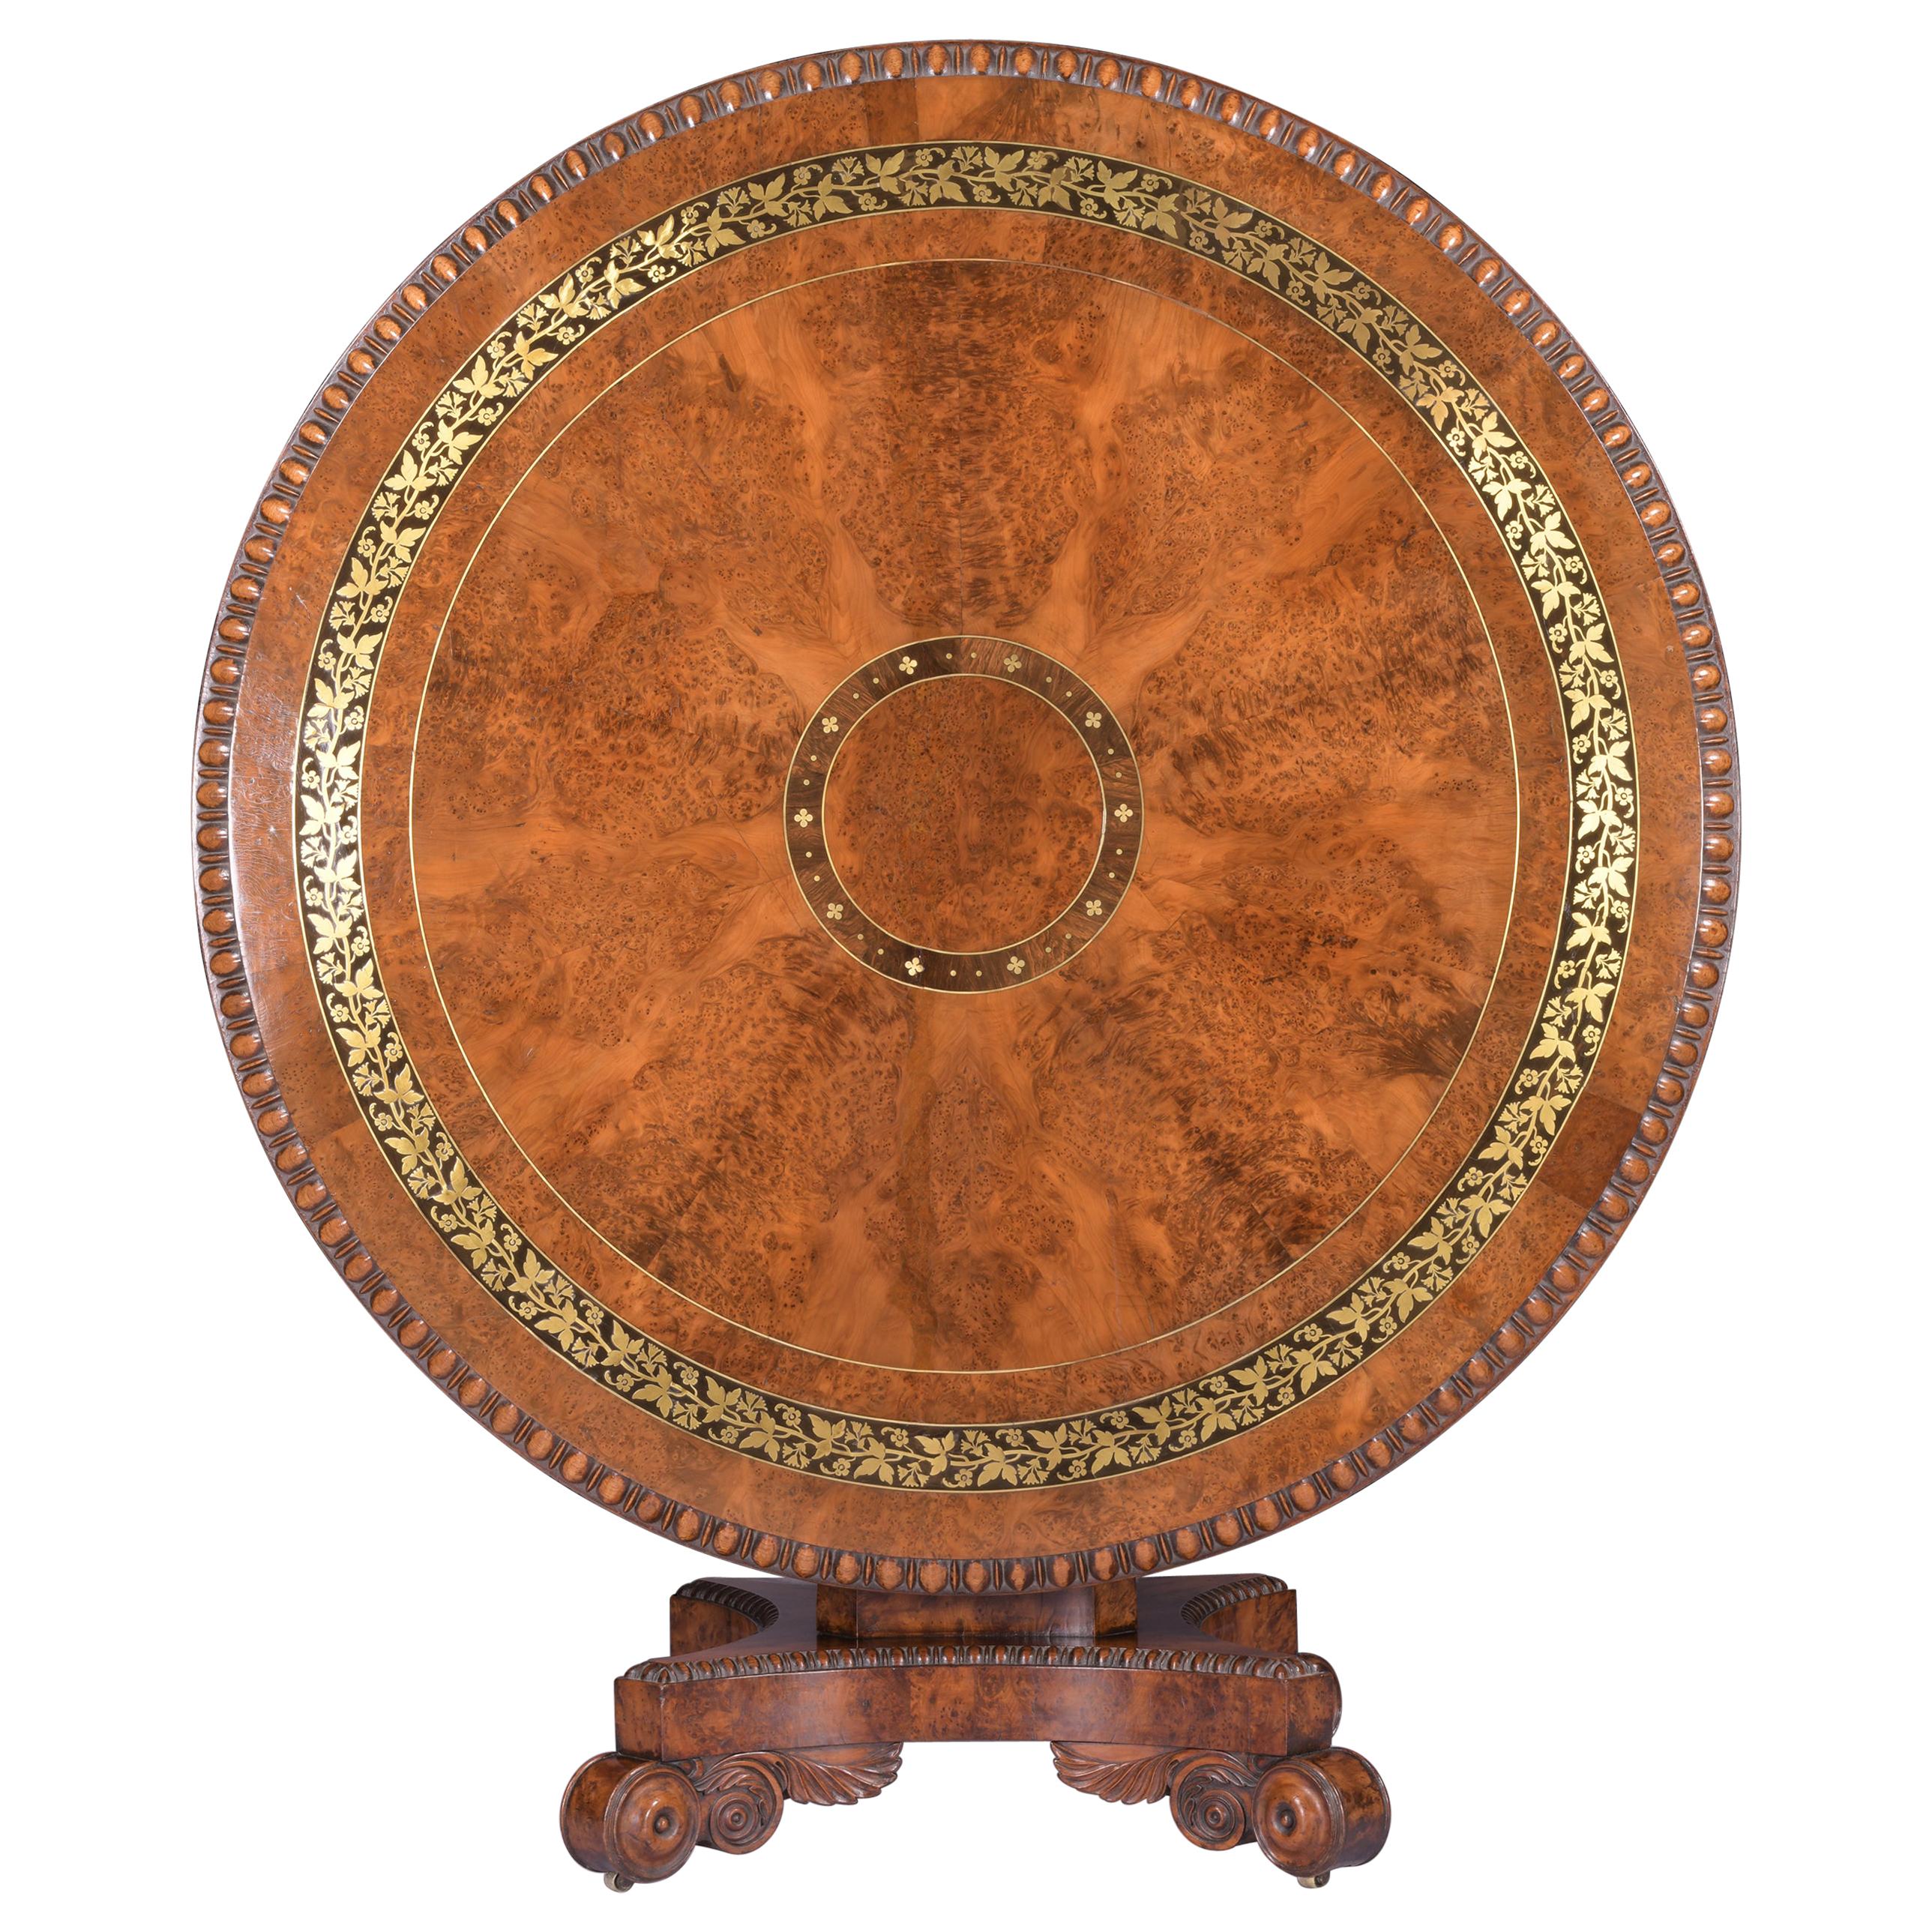 English Regency Burr Yew Wood Centre Table Attributed To George Bullock